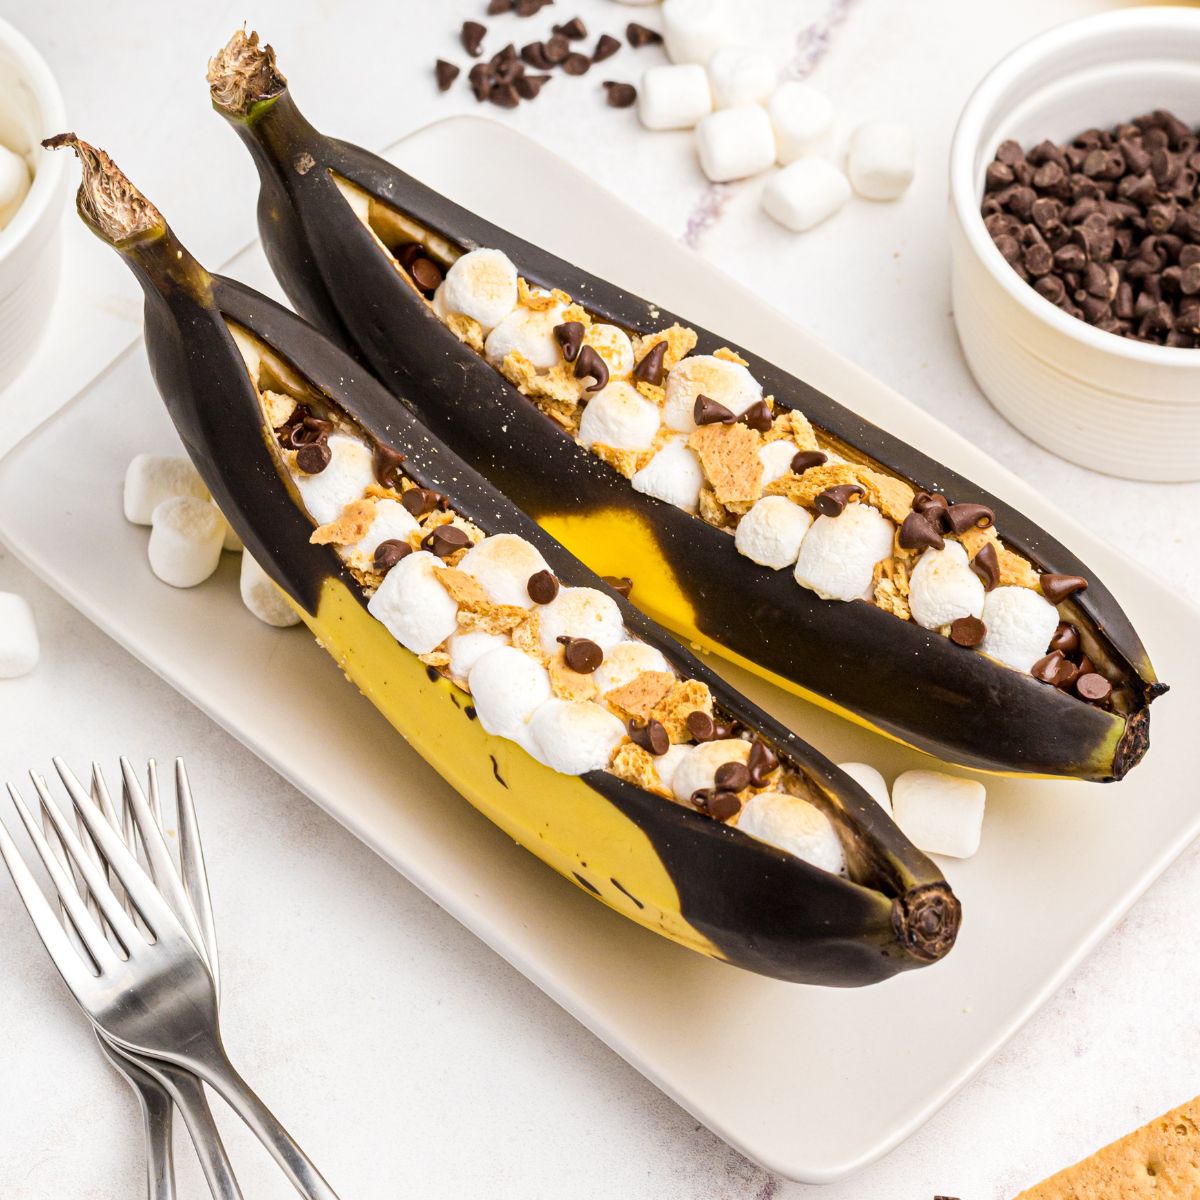 Bananas sliced open and stuffed with marshmallows and chocolate chips, then air fried.